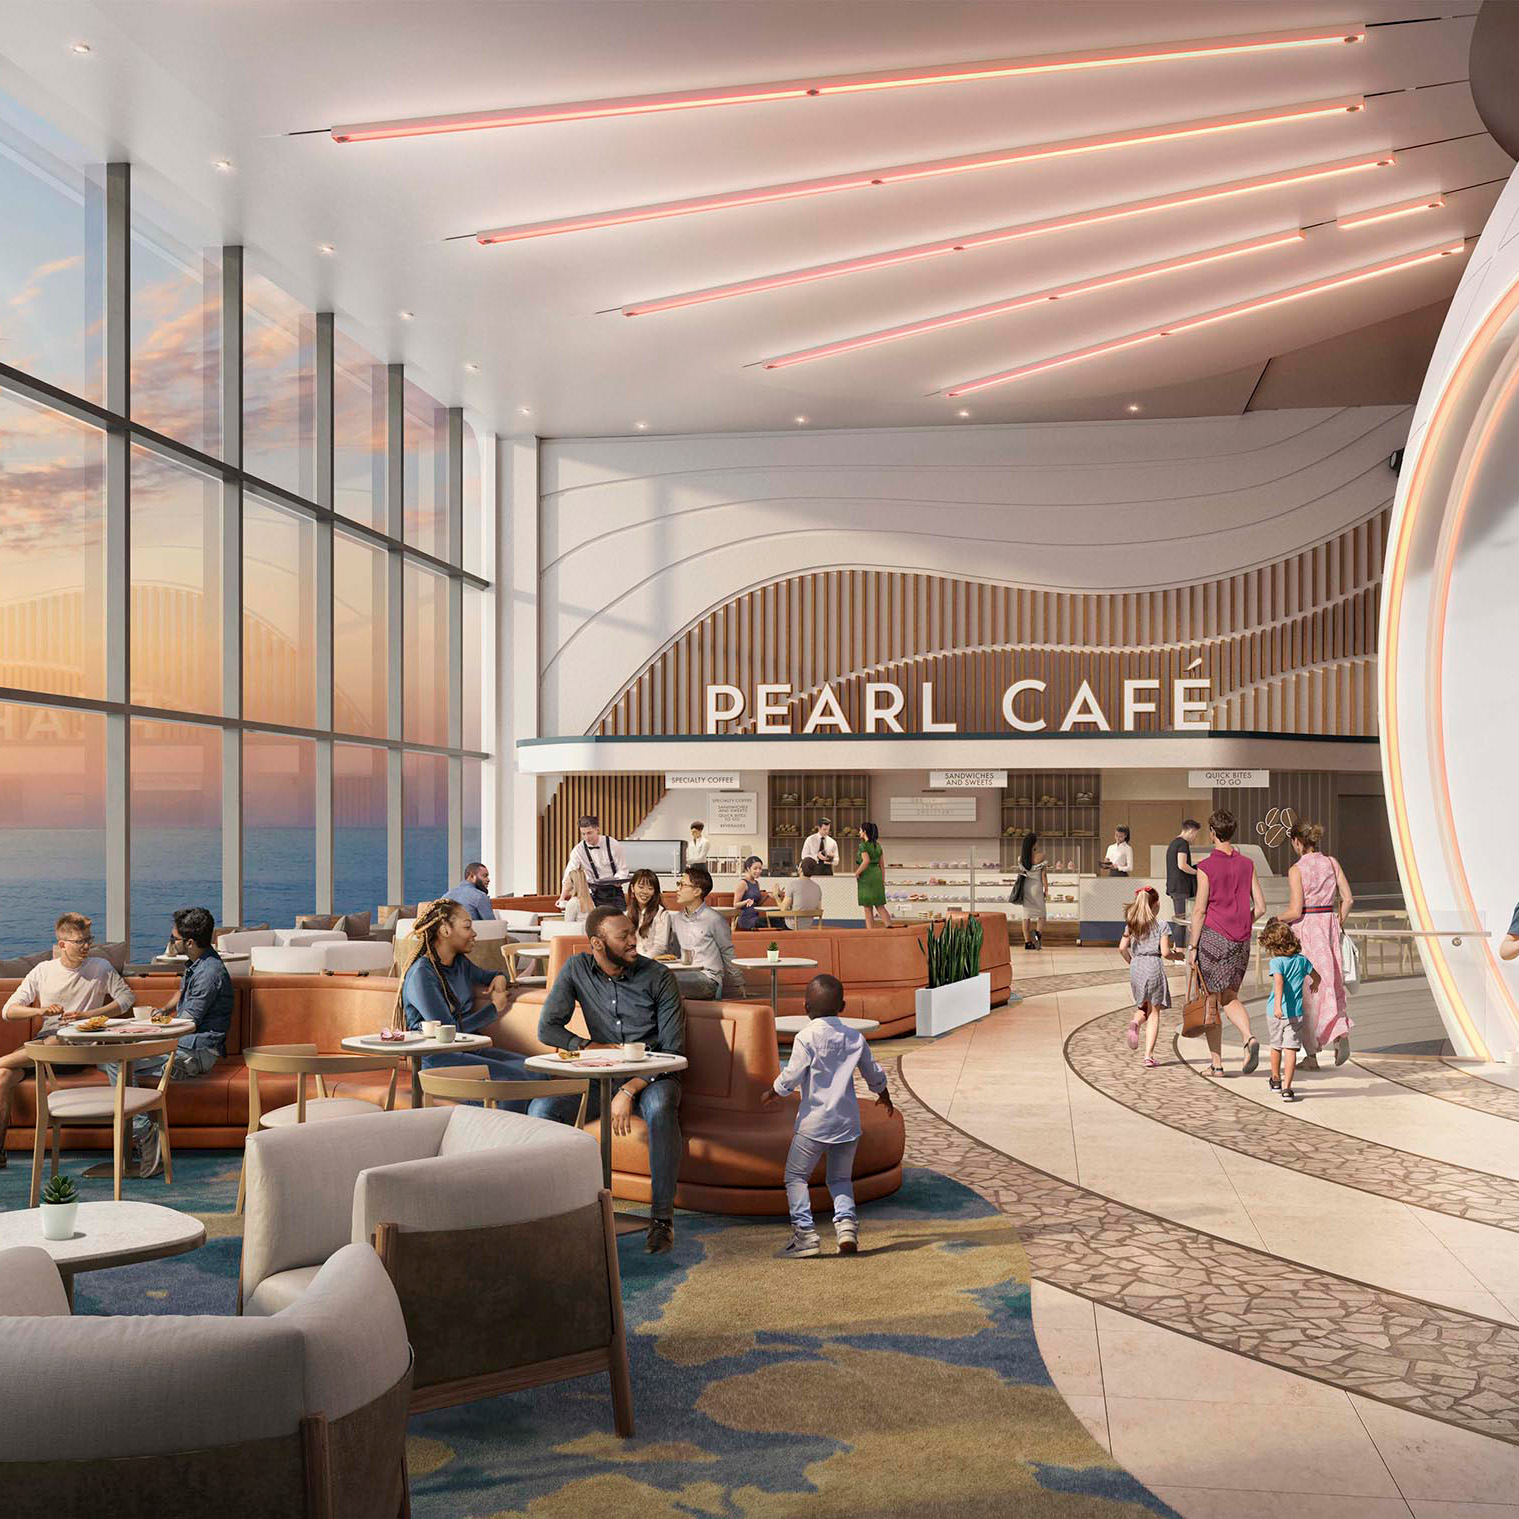 The Pearl Cafe is a new stop to enjoy bites, like freshly pressed paninis and salads, and the floor-to-ceiling ocean views in Icon of the Seas’ Royal Promenade.